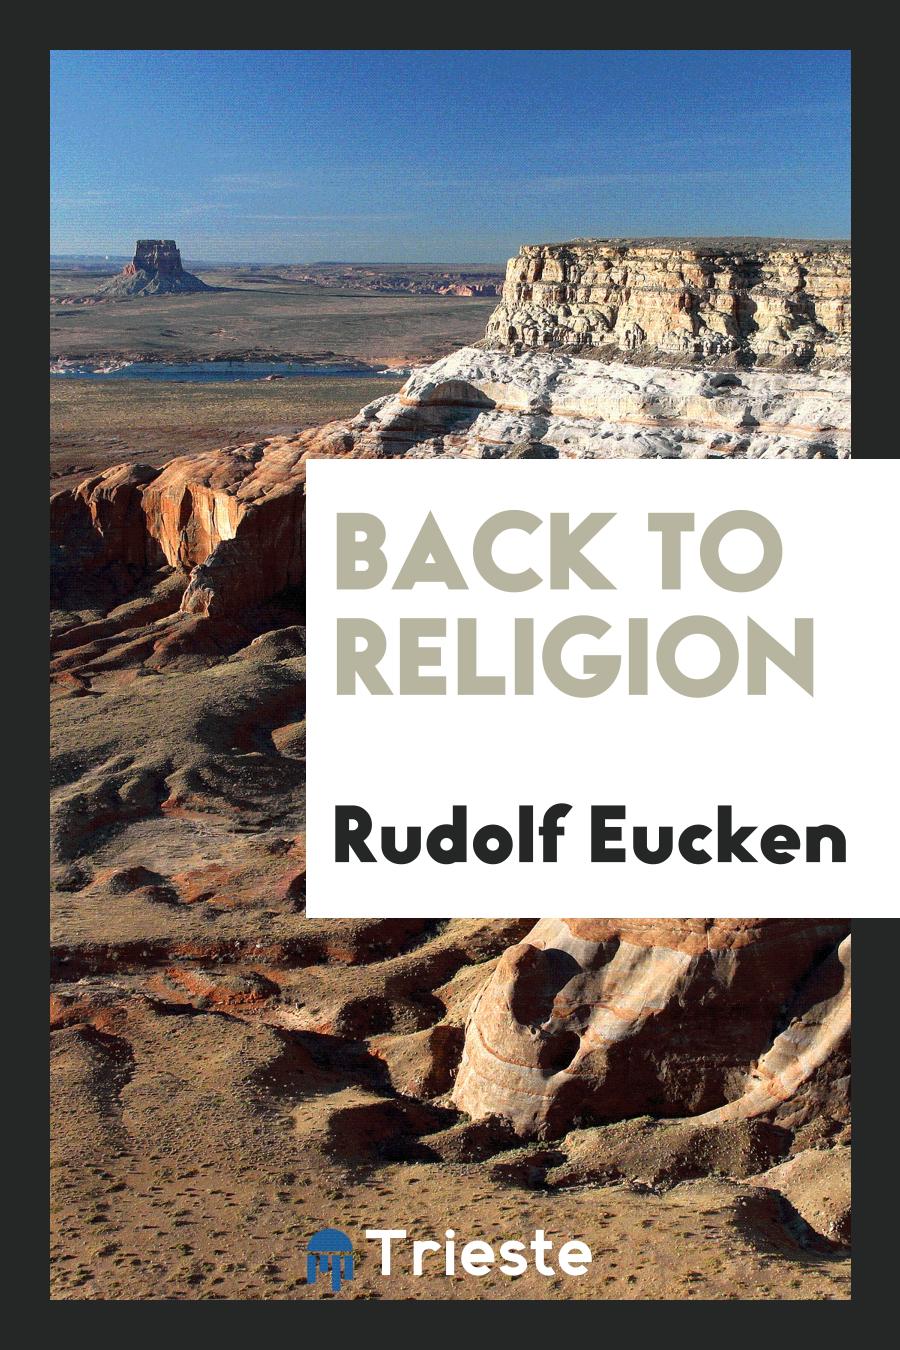 Back to religion